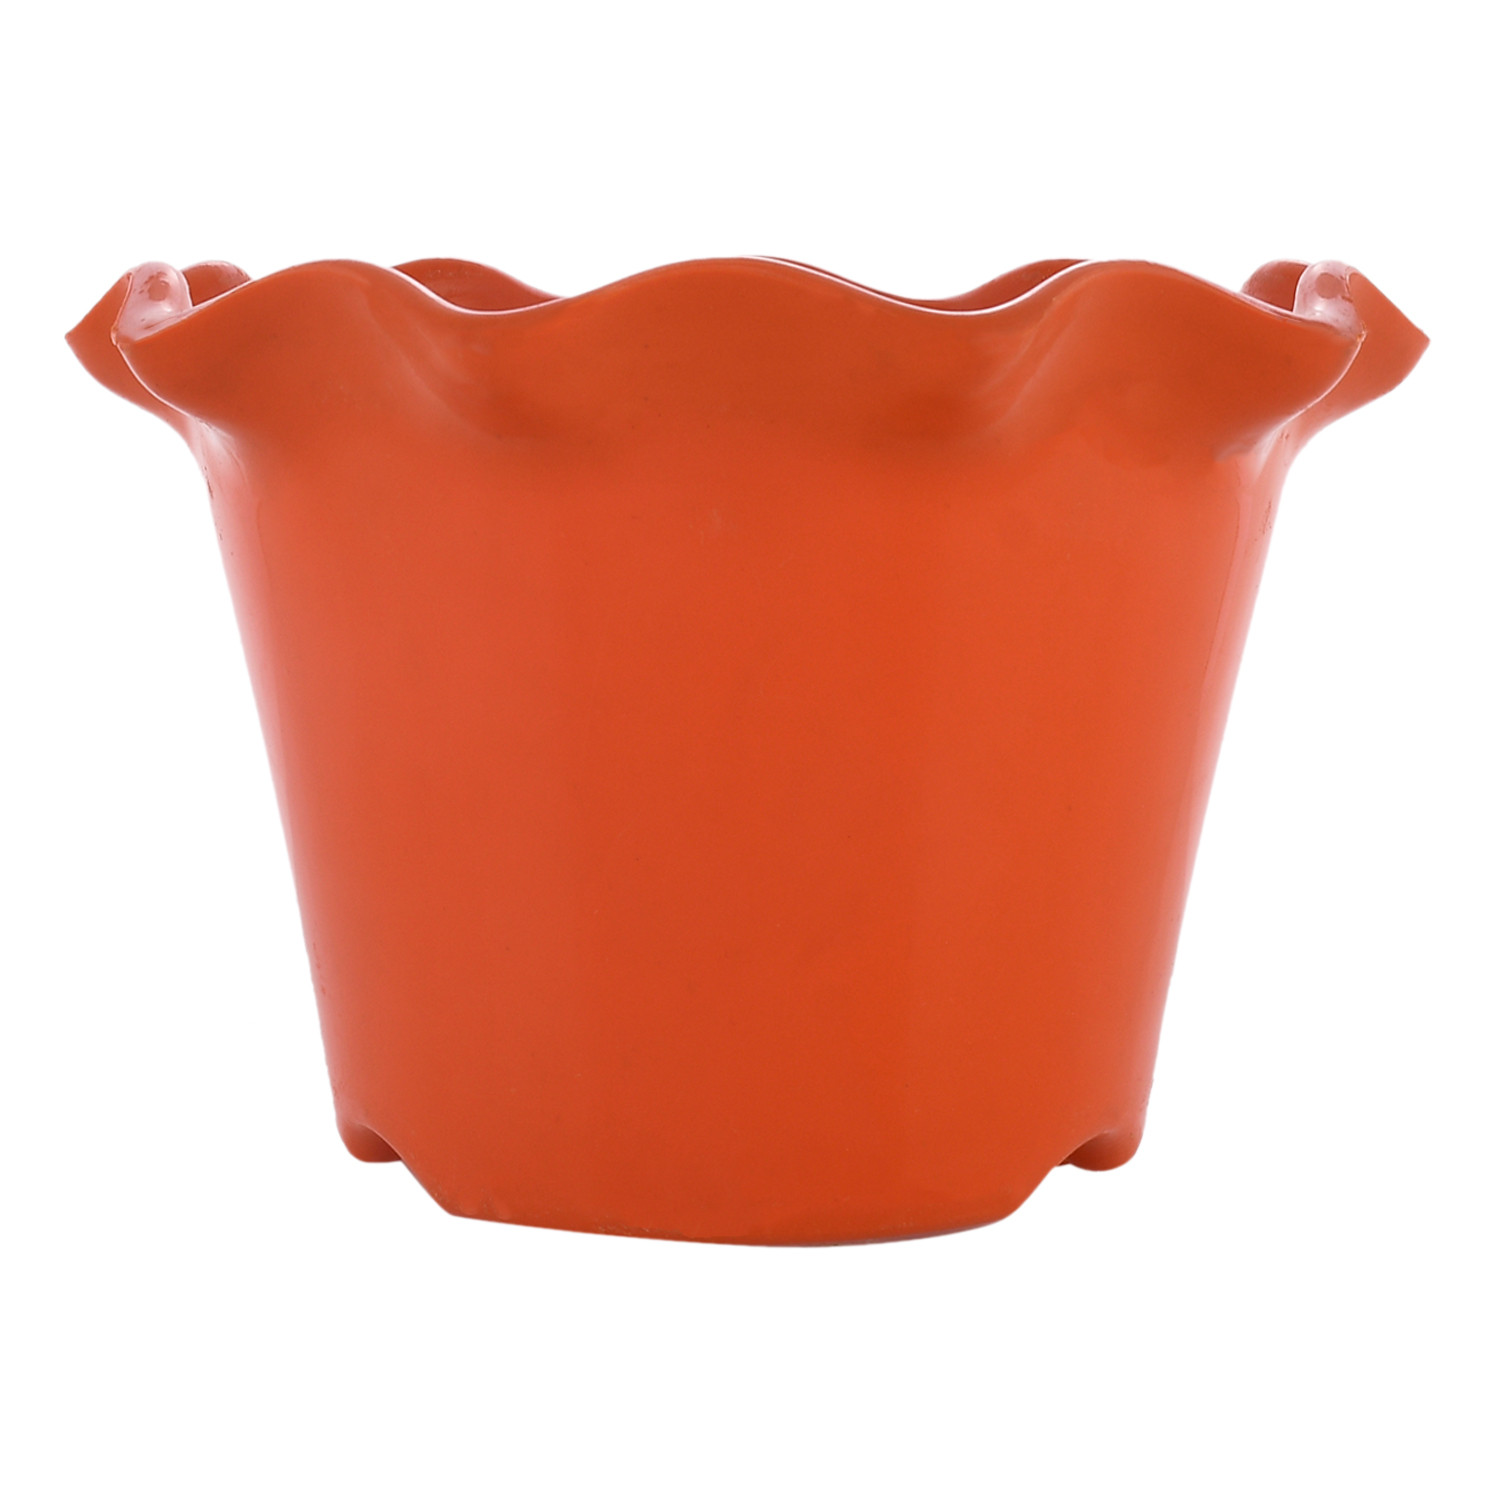 Kuber Industries Blossom Flower Pot|Durable Plastic Flower Pot|Gamla With Drain Holes for Home Décor|Balcony|Garden|8 Inch|Pack of 2 (Orange & Yellow)